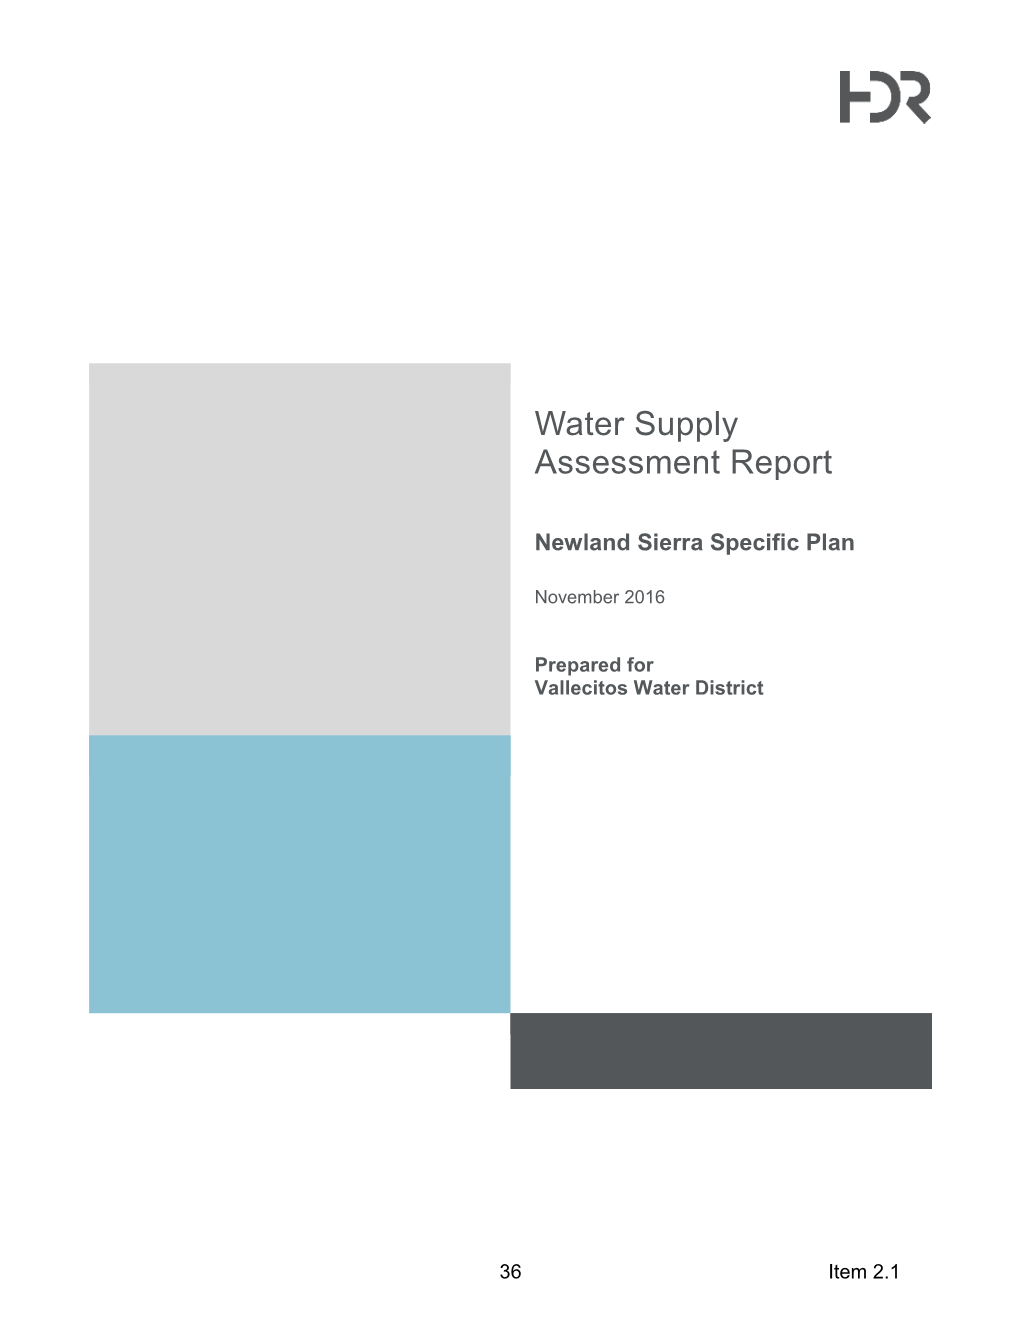 Water Supply Assessment Report